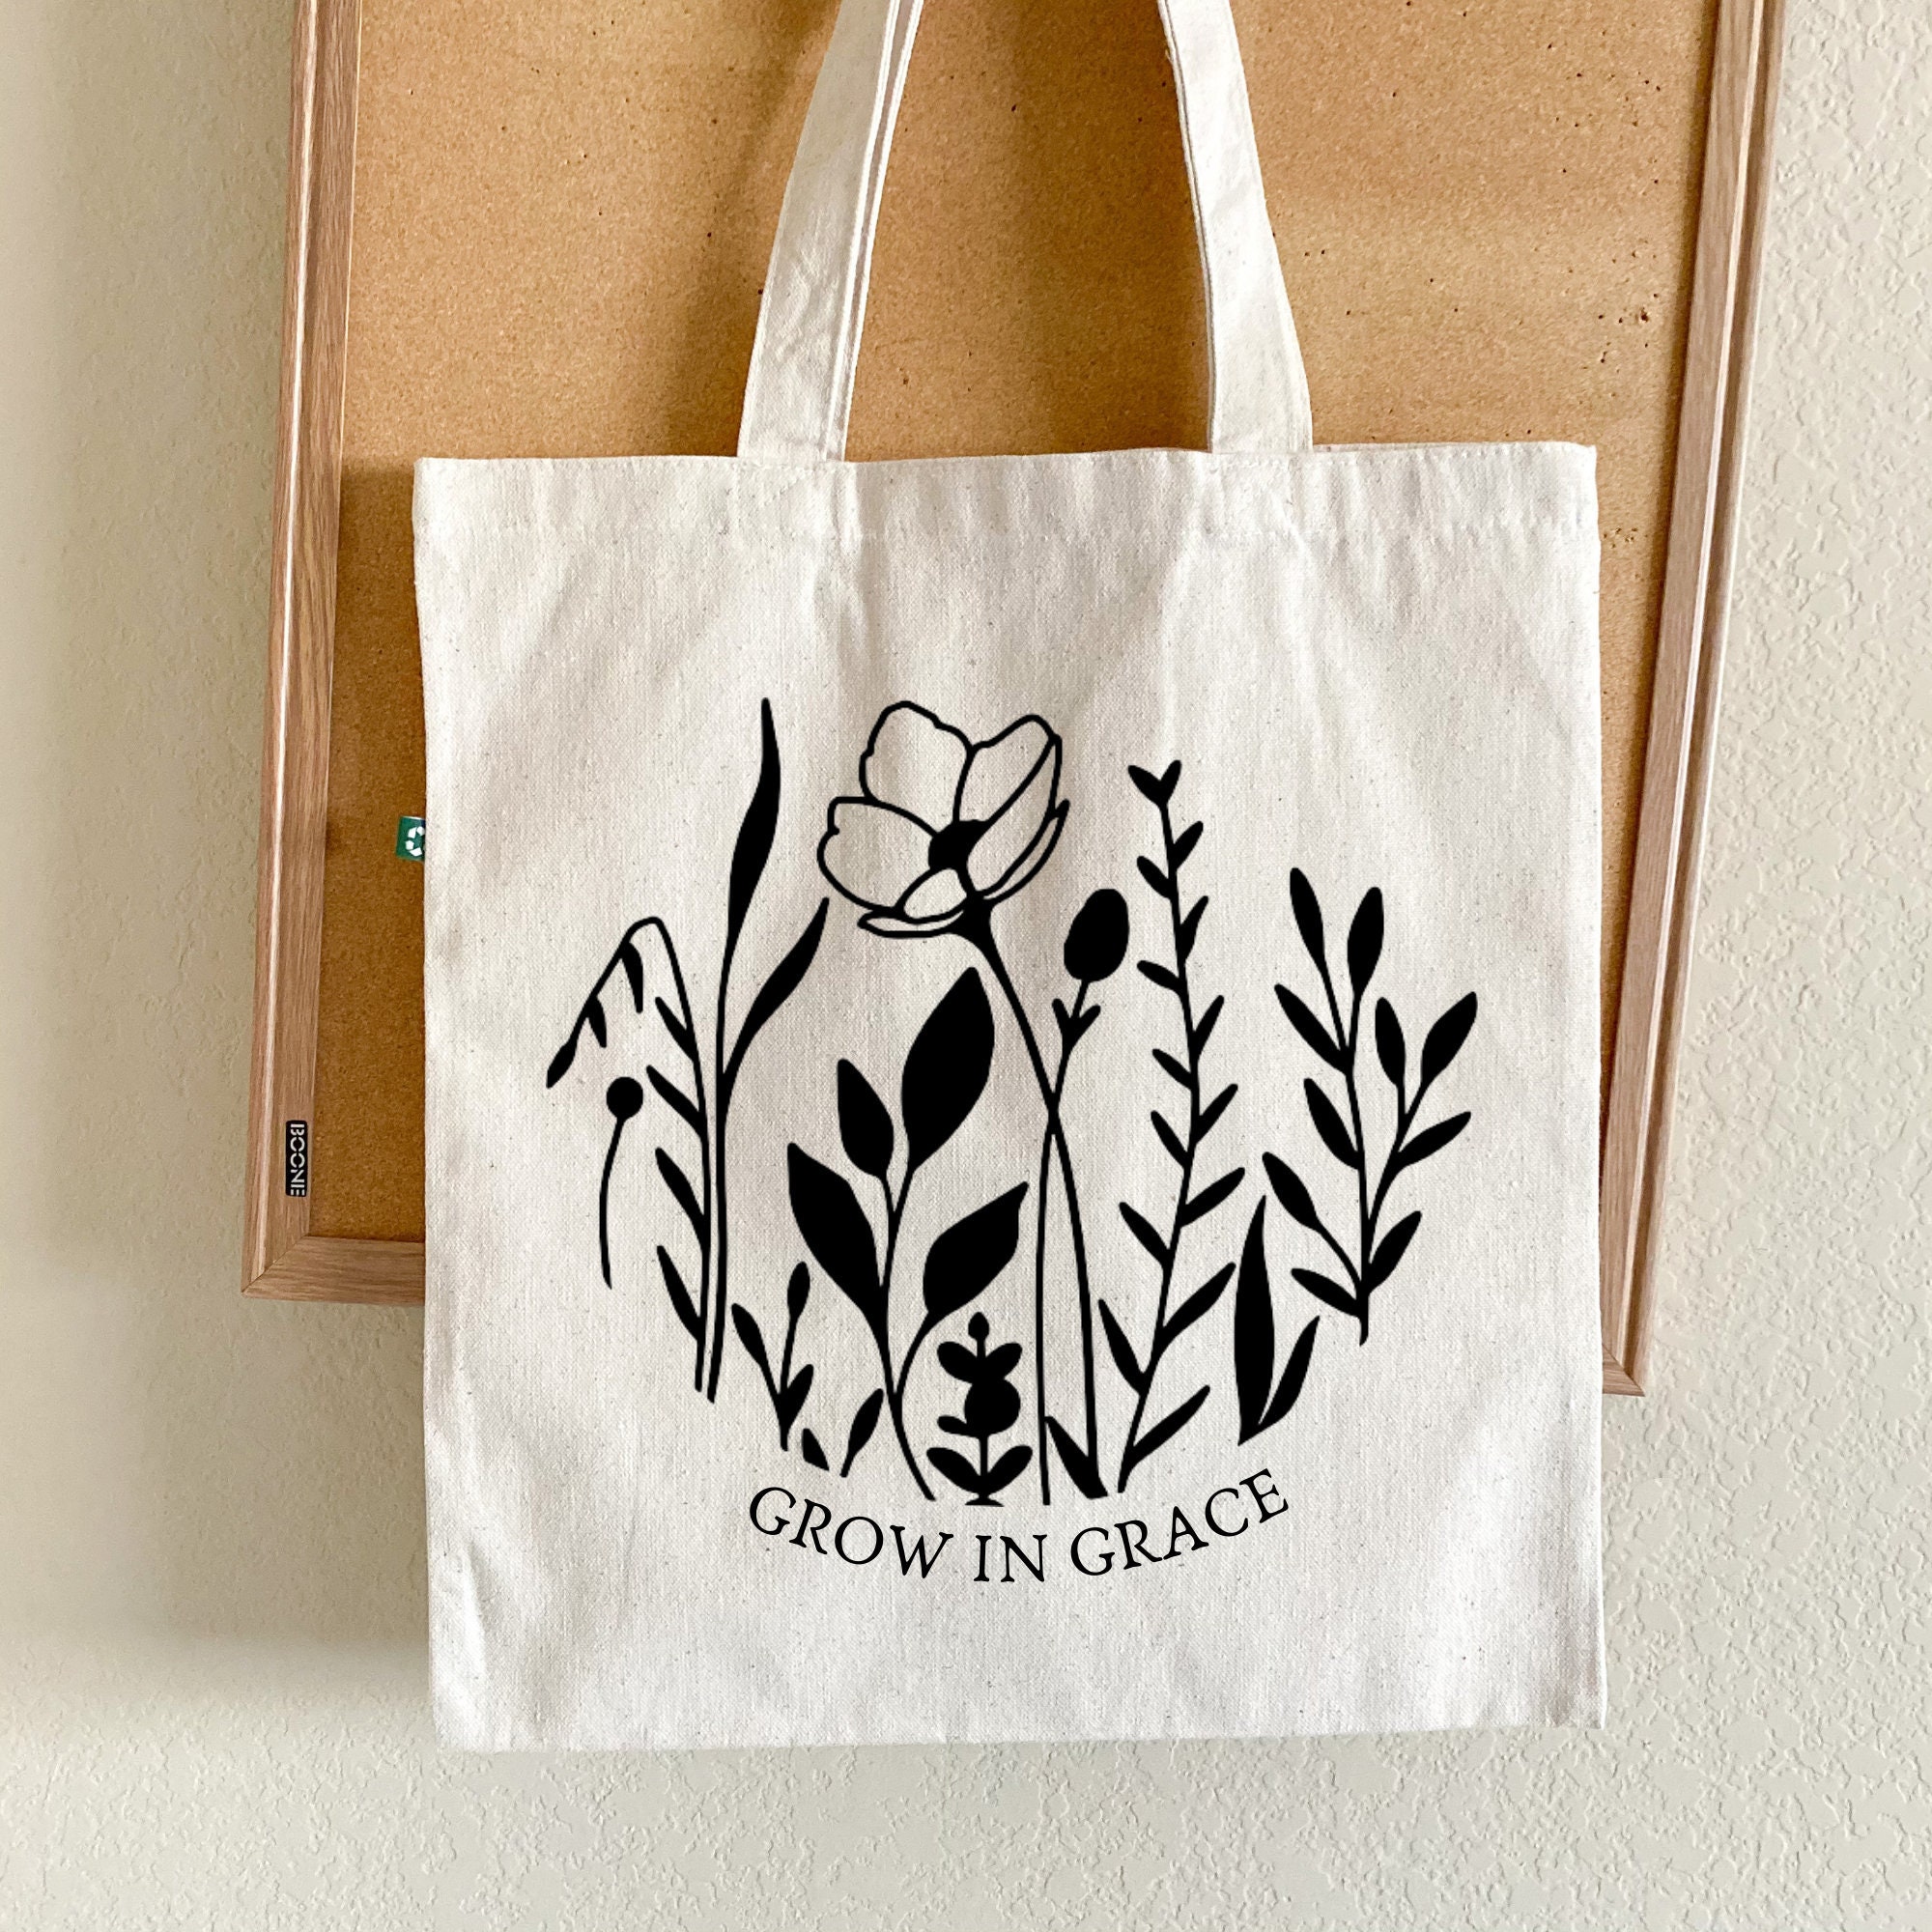 His Grace is Sufficient Christian Tote Bag